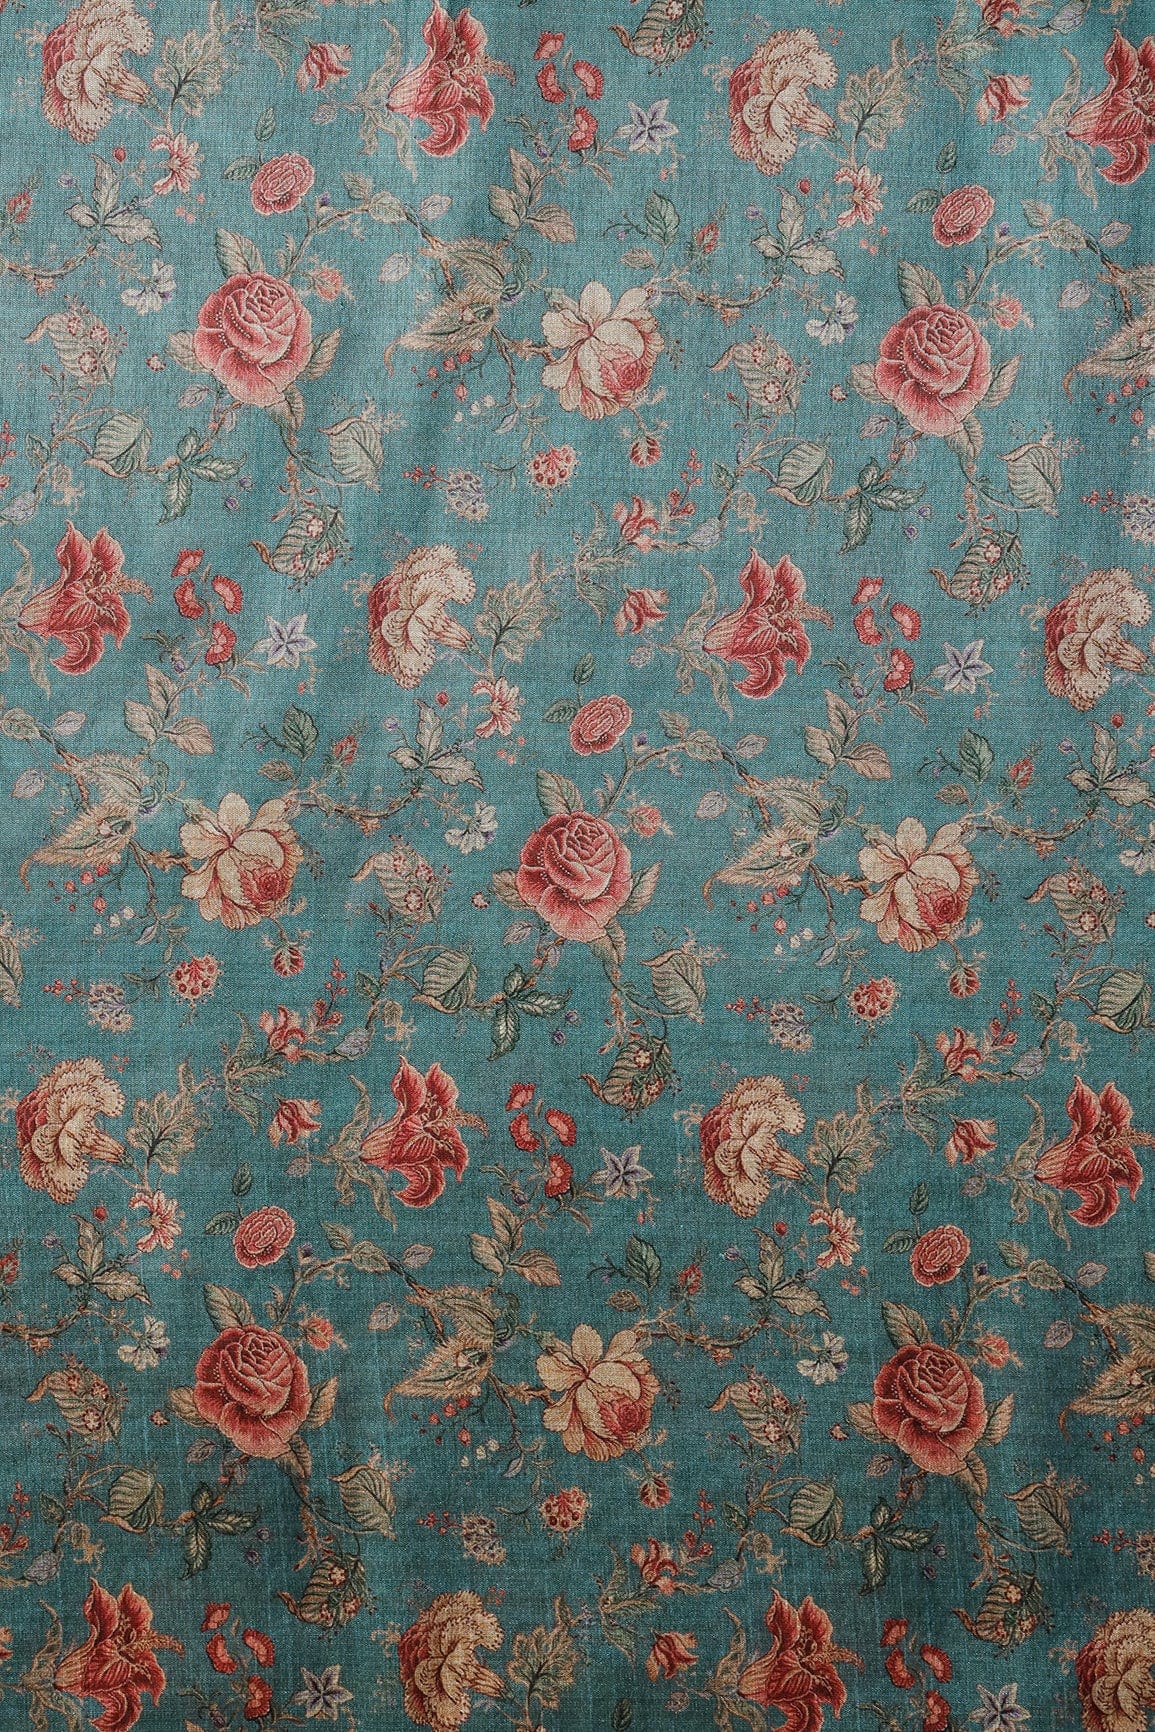 doeraa Prints Red And Yellow Attractive Floral Pattern Digital Print On Teal Blue Mulberry Silk Fabric